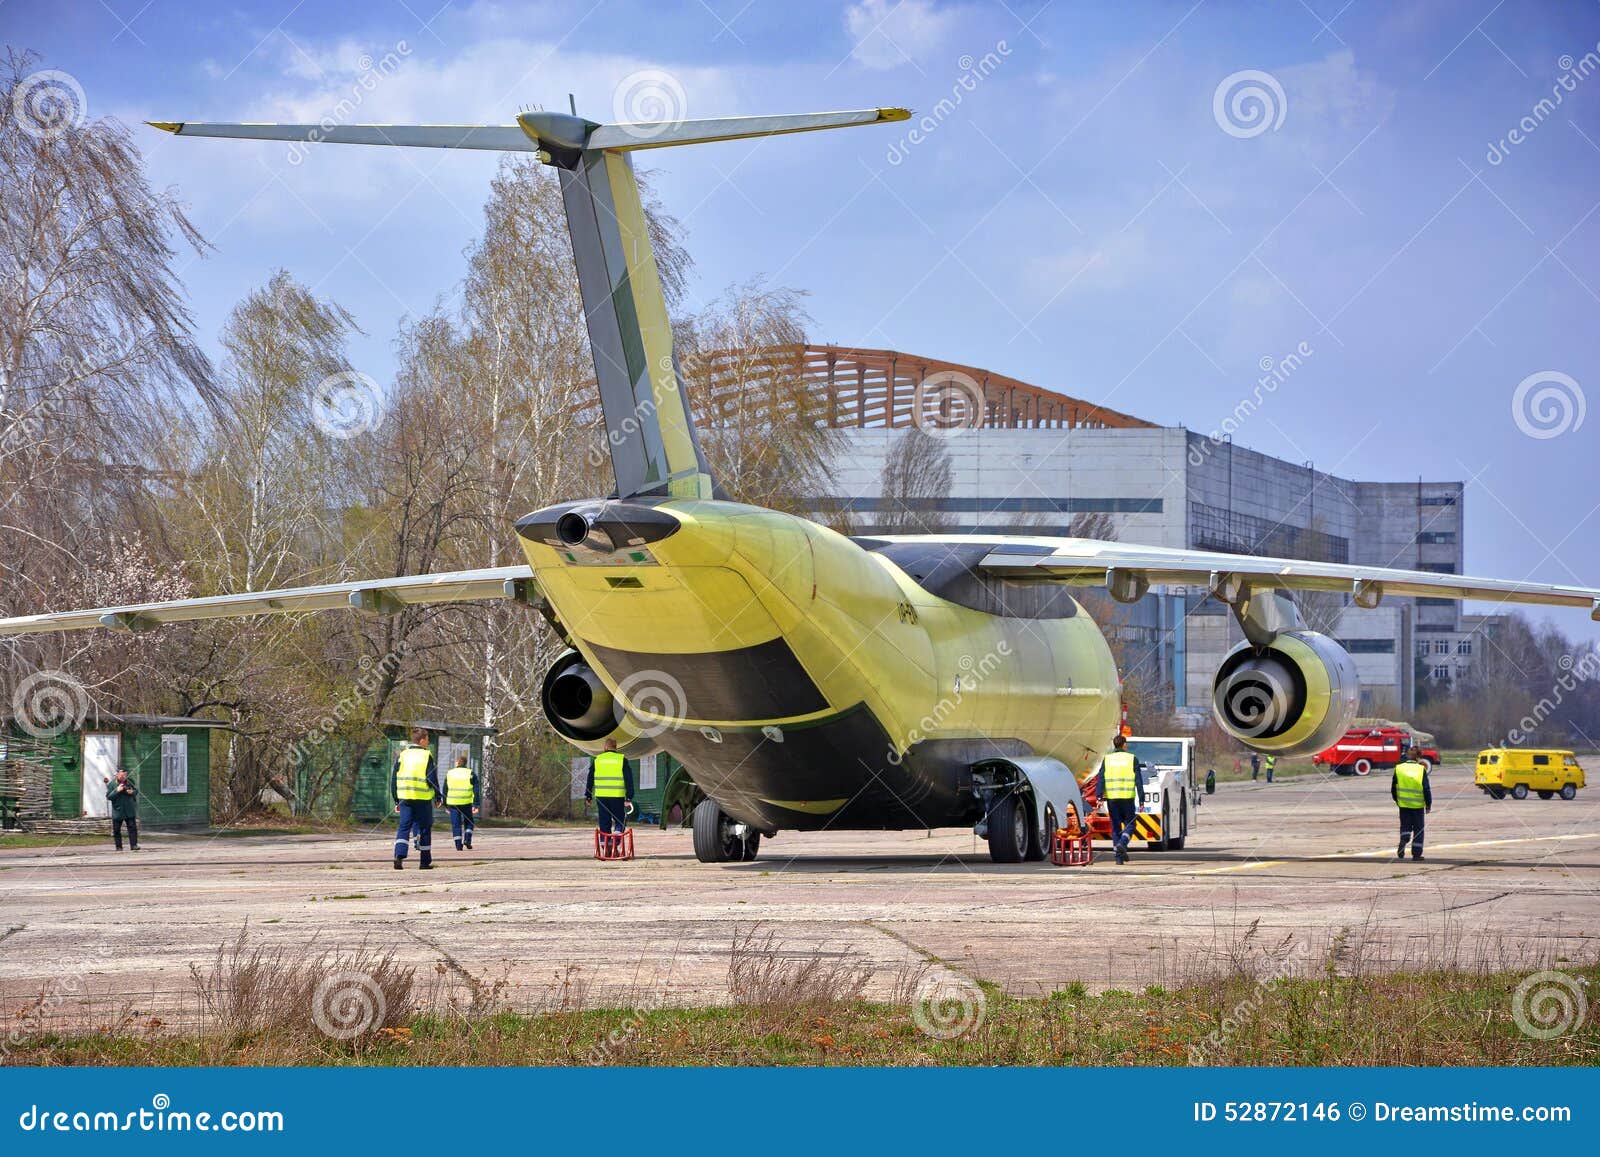 newest-transport-aircraft-antonov-towed-to-flight-test-airfield-april-just-held-rollout-first-prototype-52872146.jpg